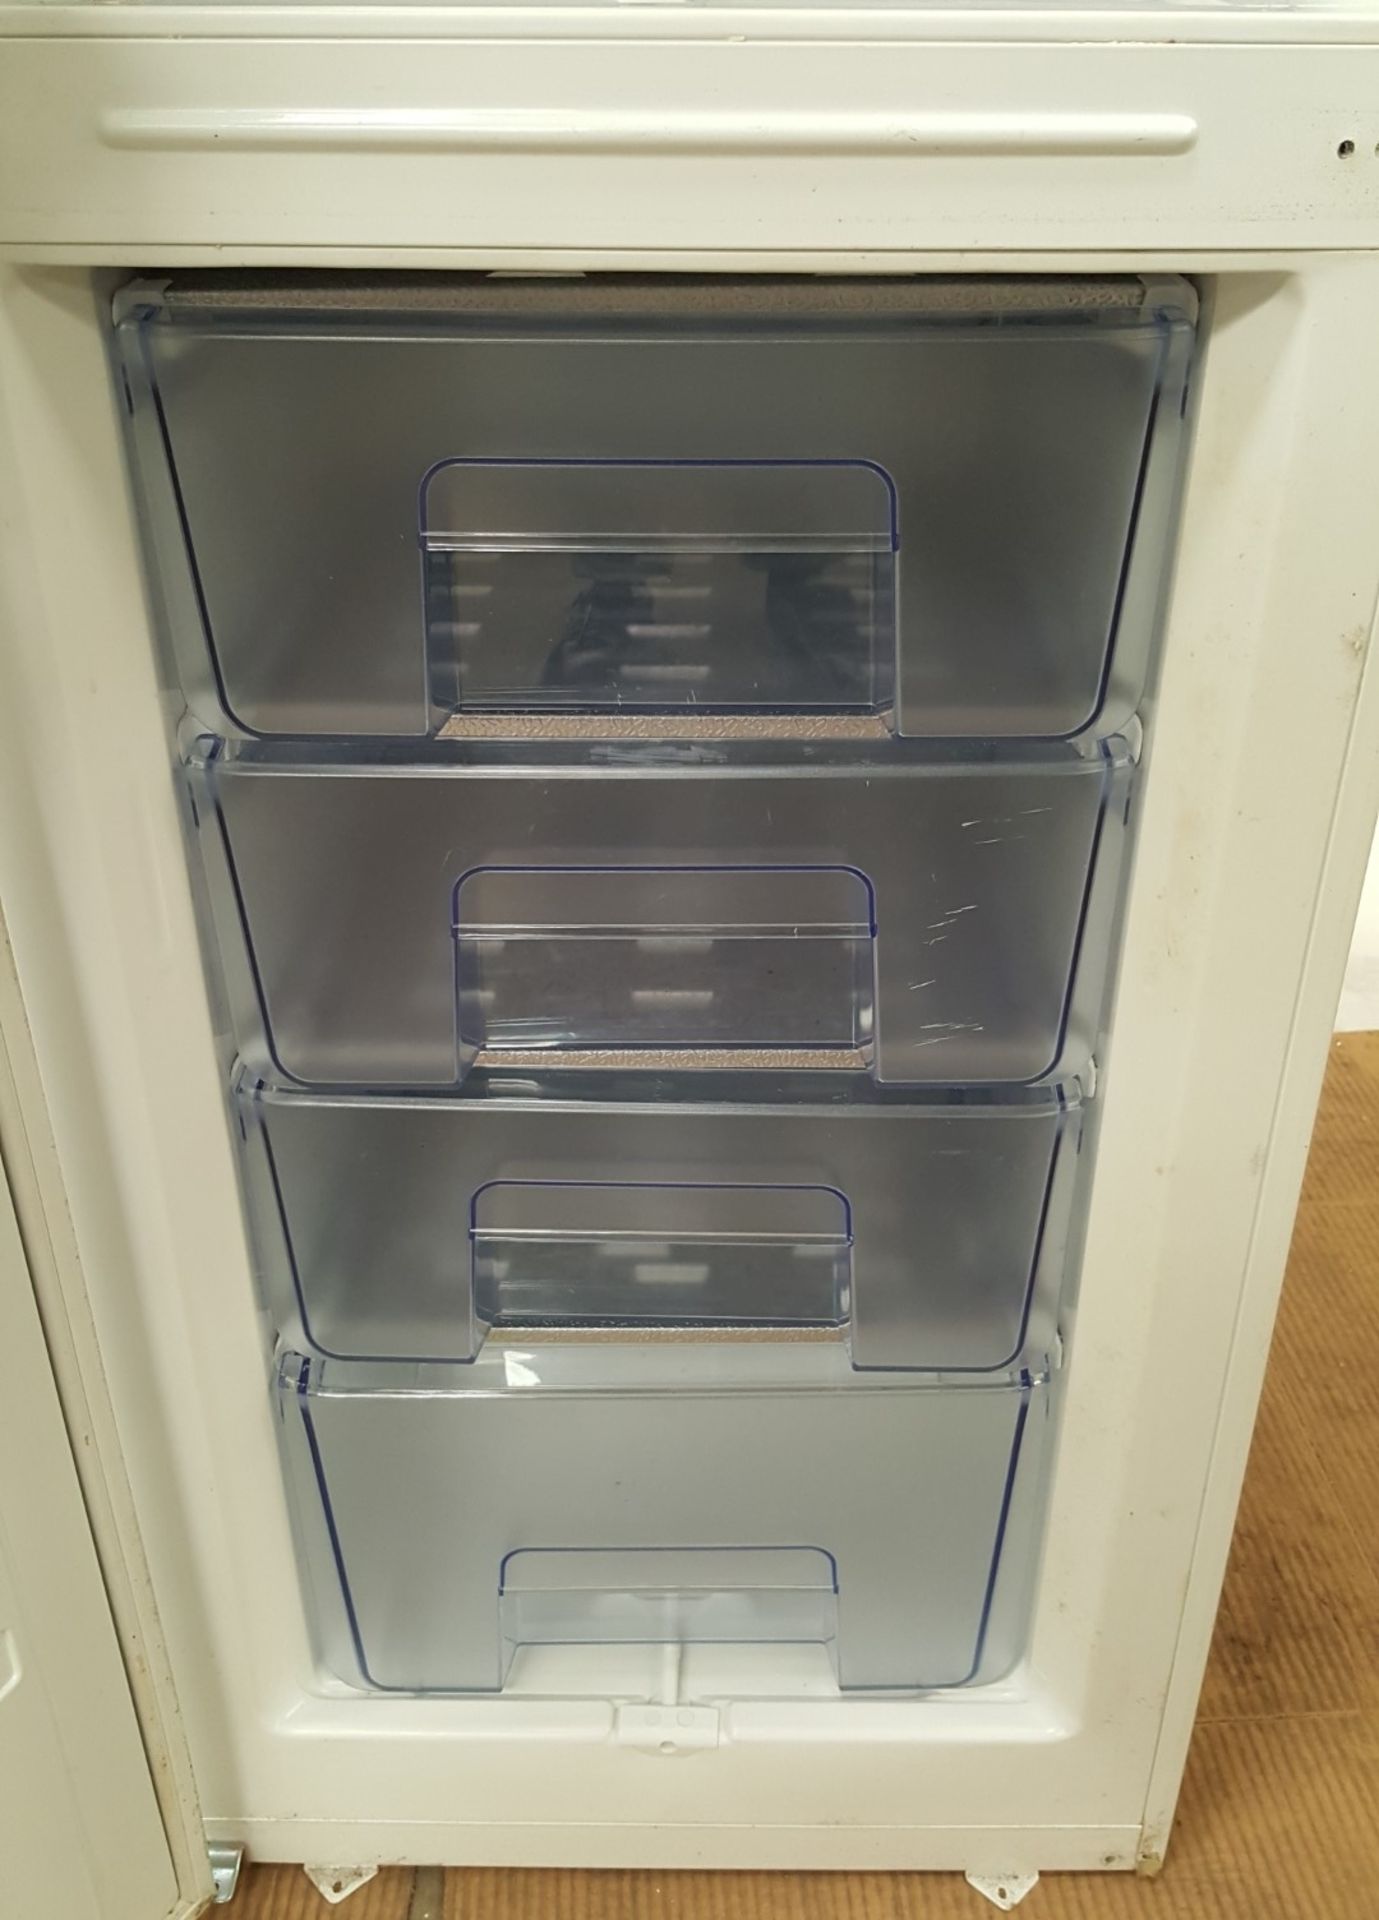 1 x Prima Integrated 60/40 Frost Free Fridge Freezer LPR356A1 - Ref BY189 - Image 7 of 7